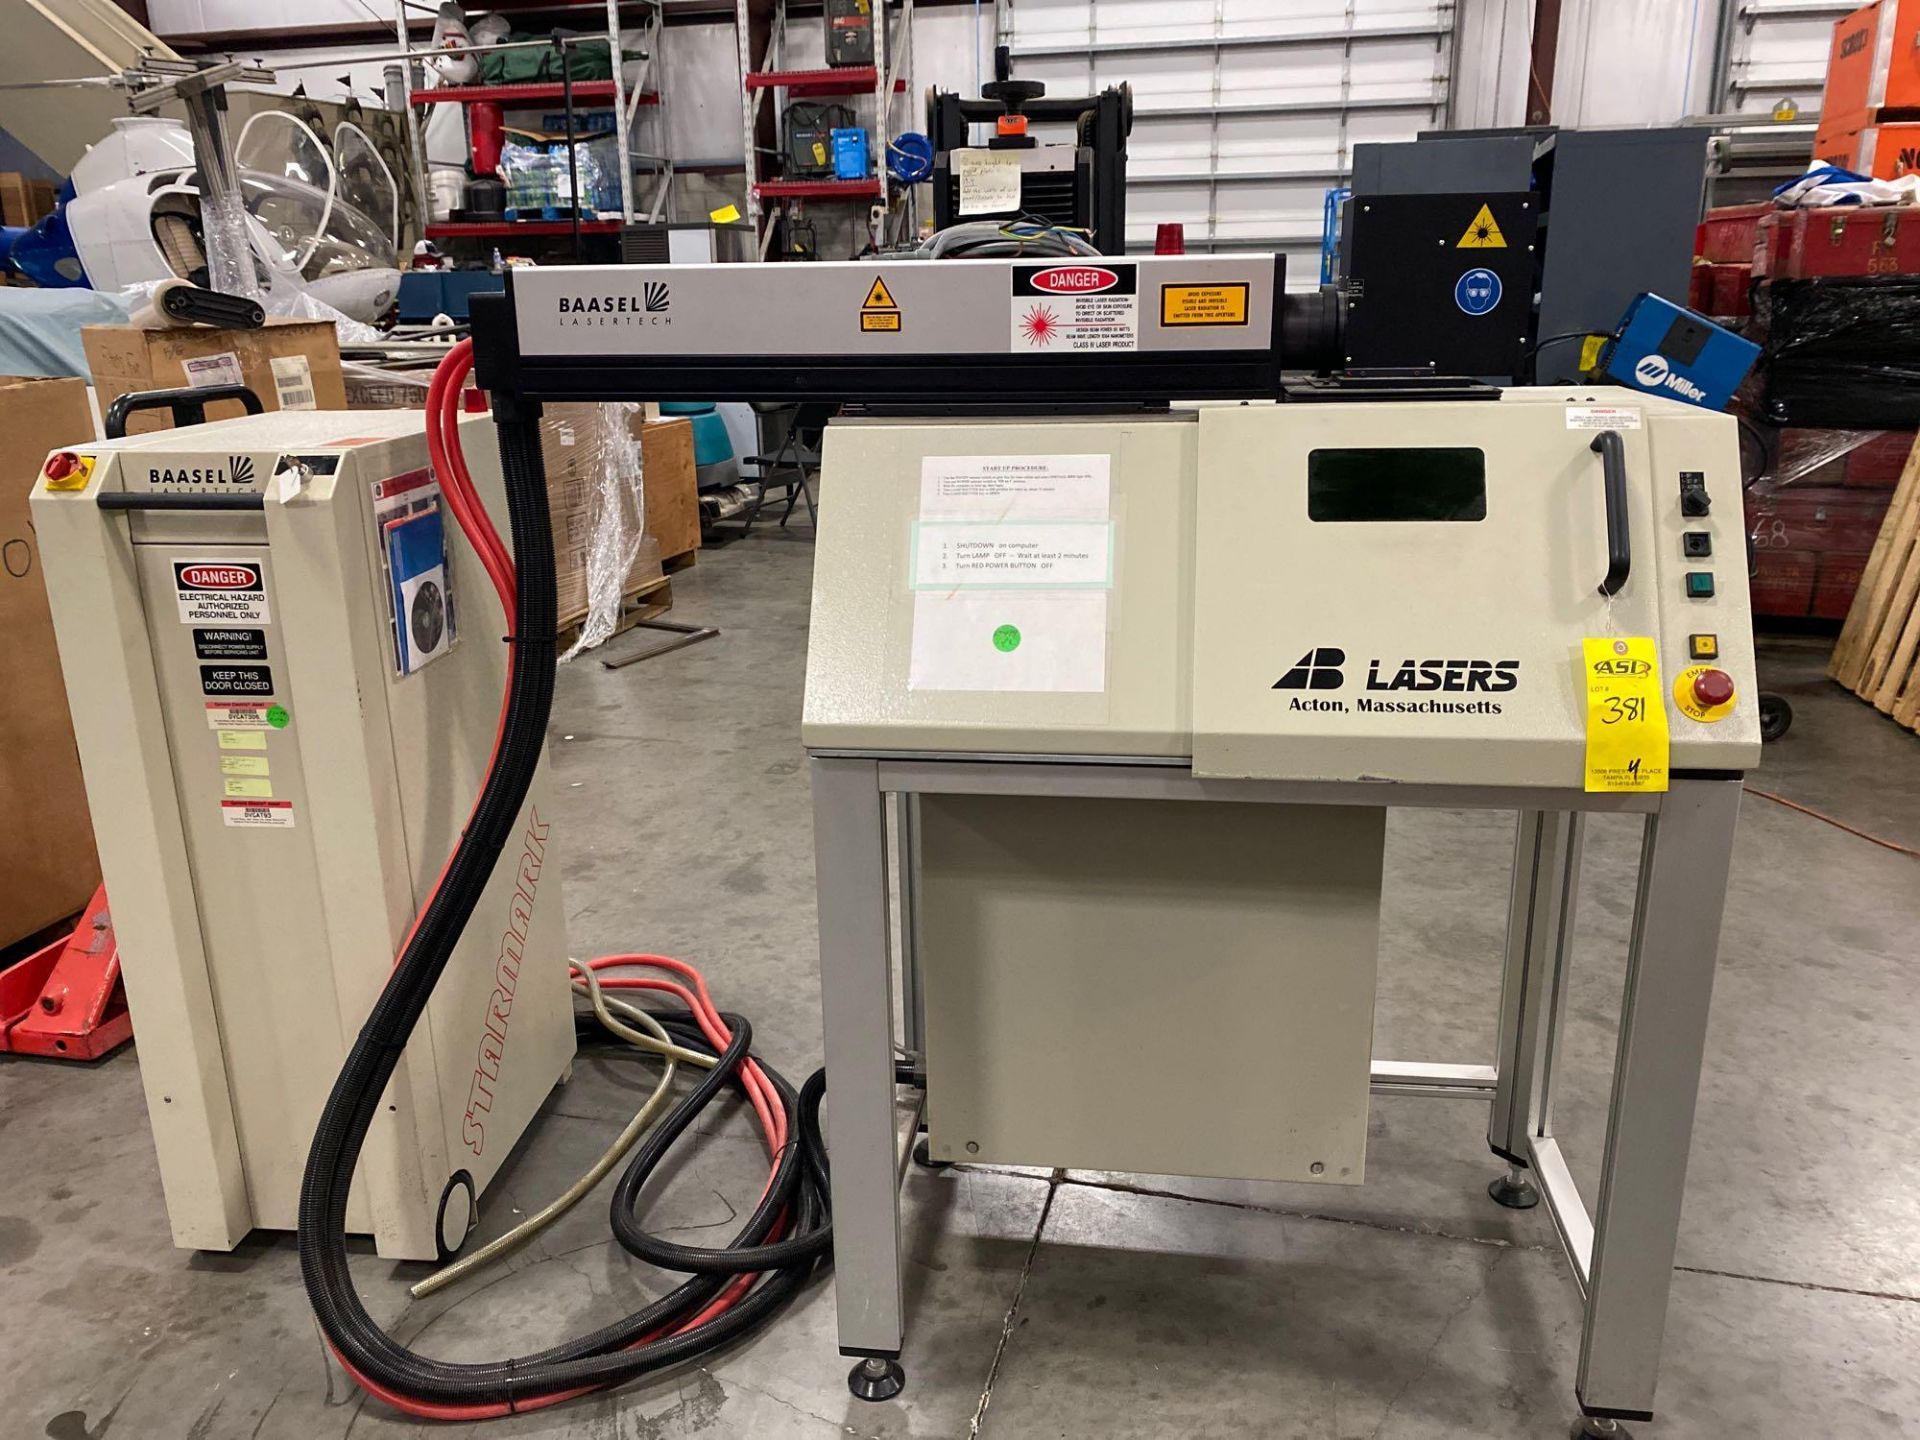 AB LASER, LME STARMARK 65W YAG LASER WAVELENGTH 1064, WAS OPERATING WHEN TAKEN OUT OF SERVICE